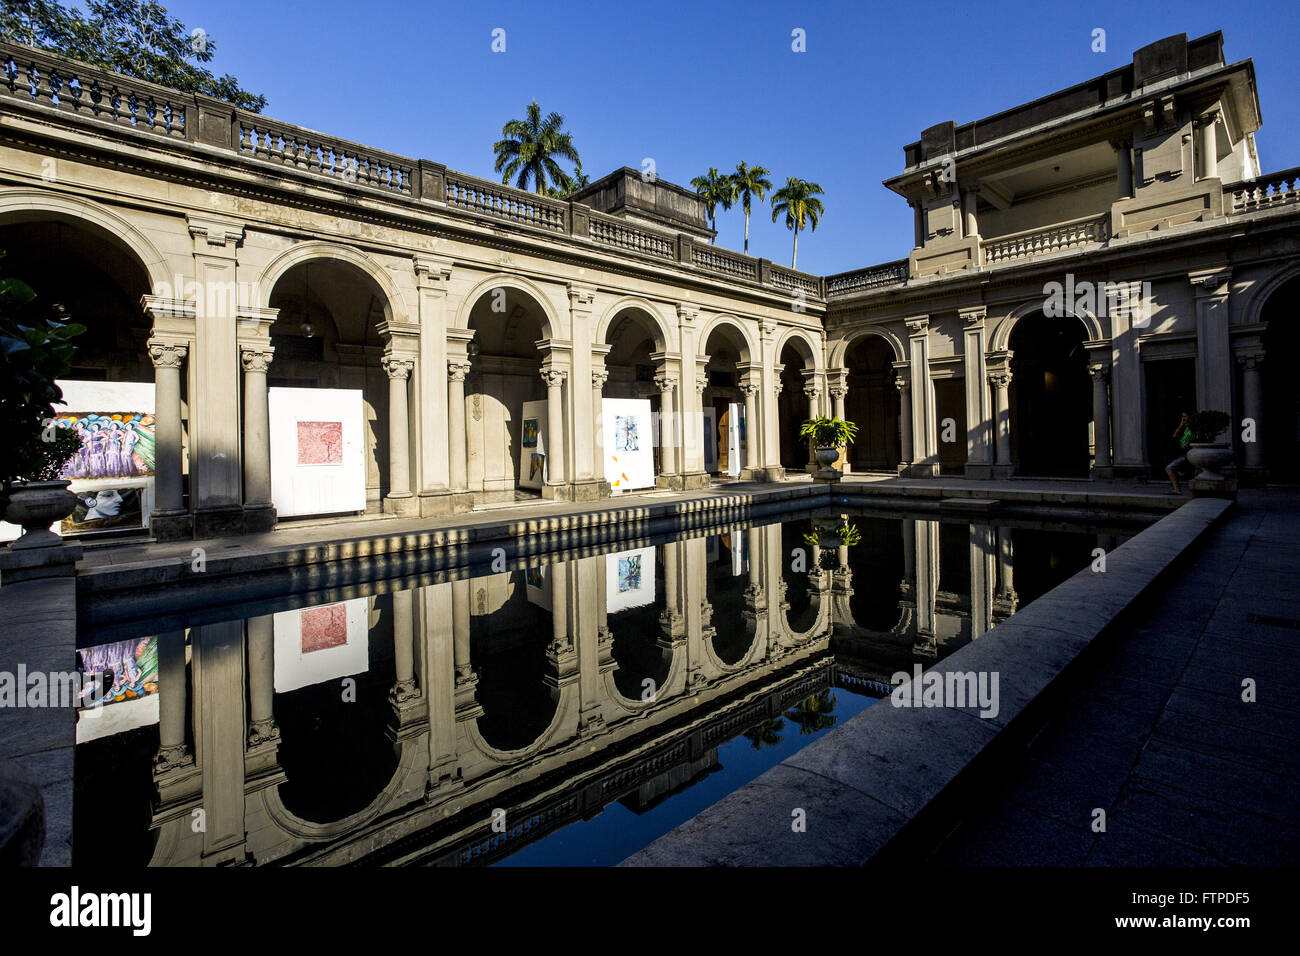 Inner patio of the Chateau reflected in the pool Parque Lage - Current School of Visual Arts Stock Photo